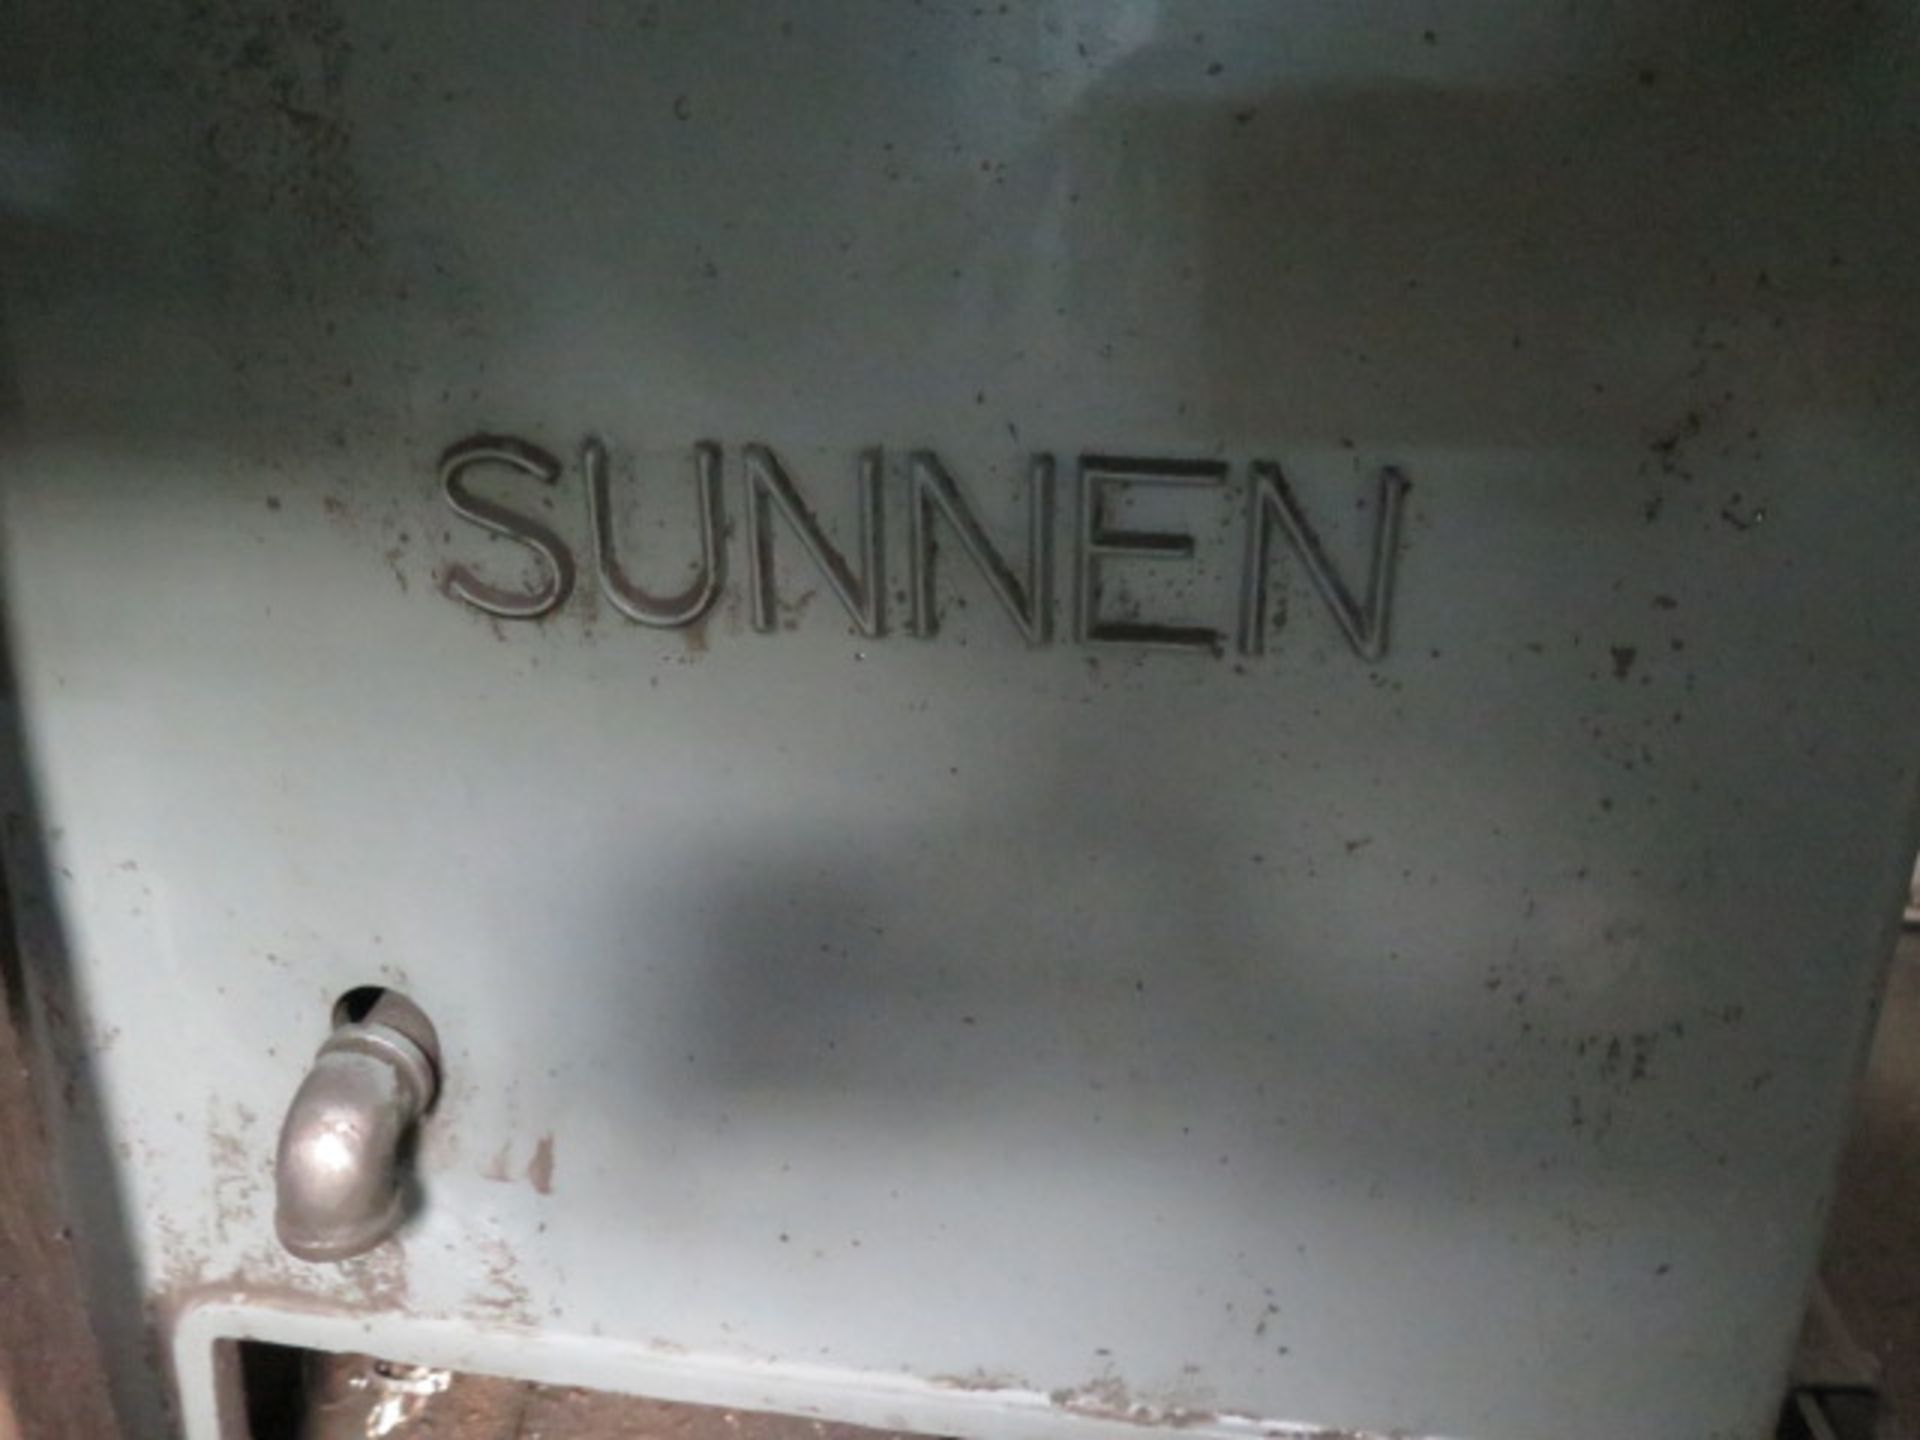 Sunnen MBB-1290D Precision Honing Machine s/n 18970 w/ Coolant (SOLD AS-IS - NO WARRANTY) - Image 3 of 7